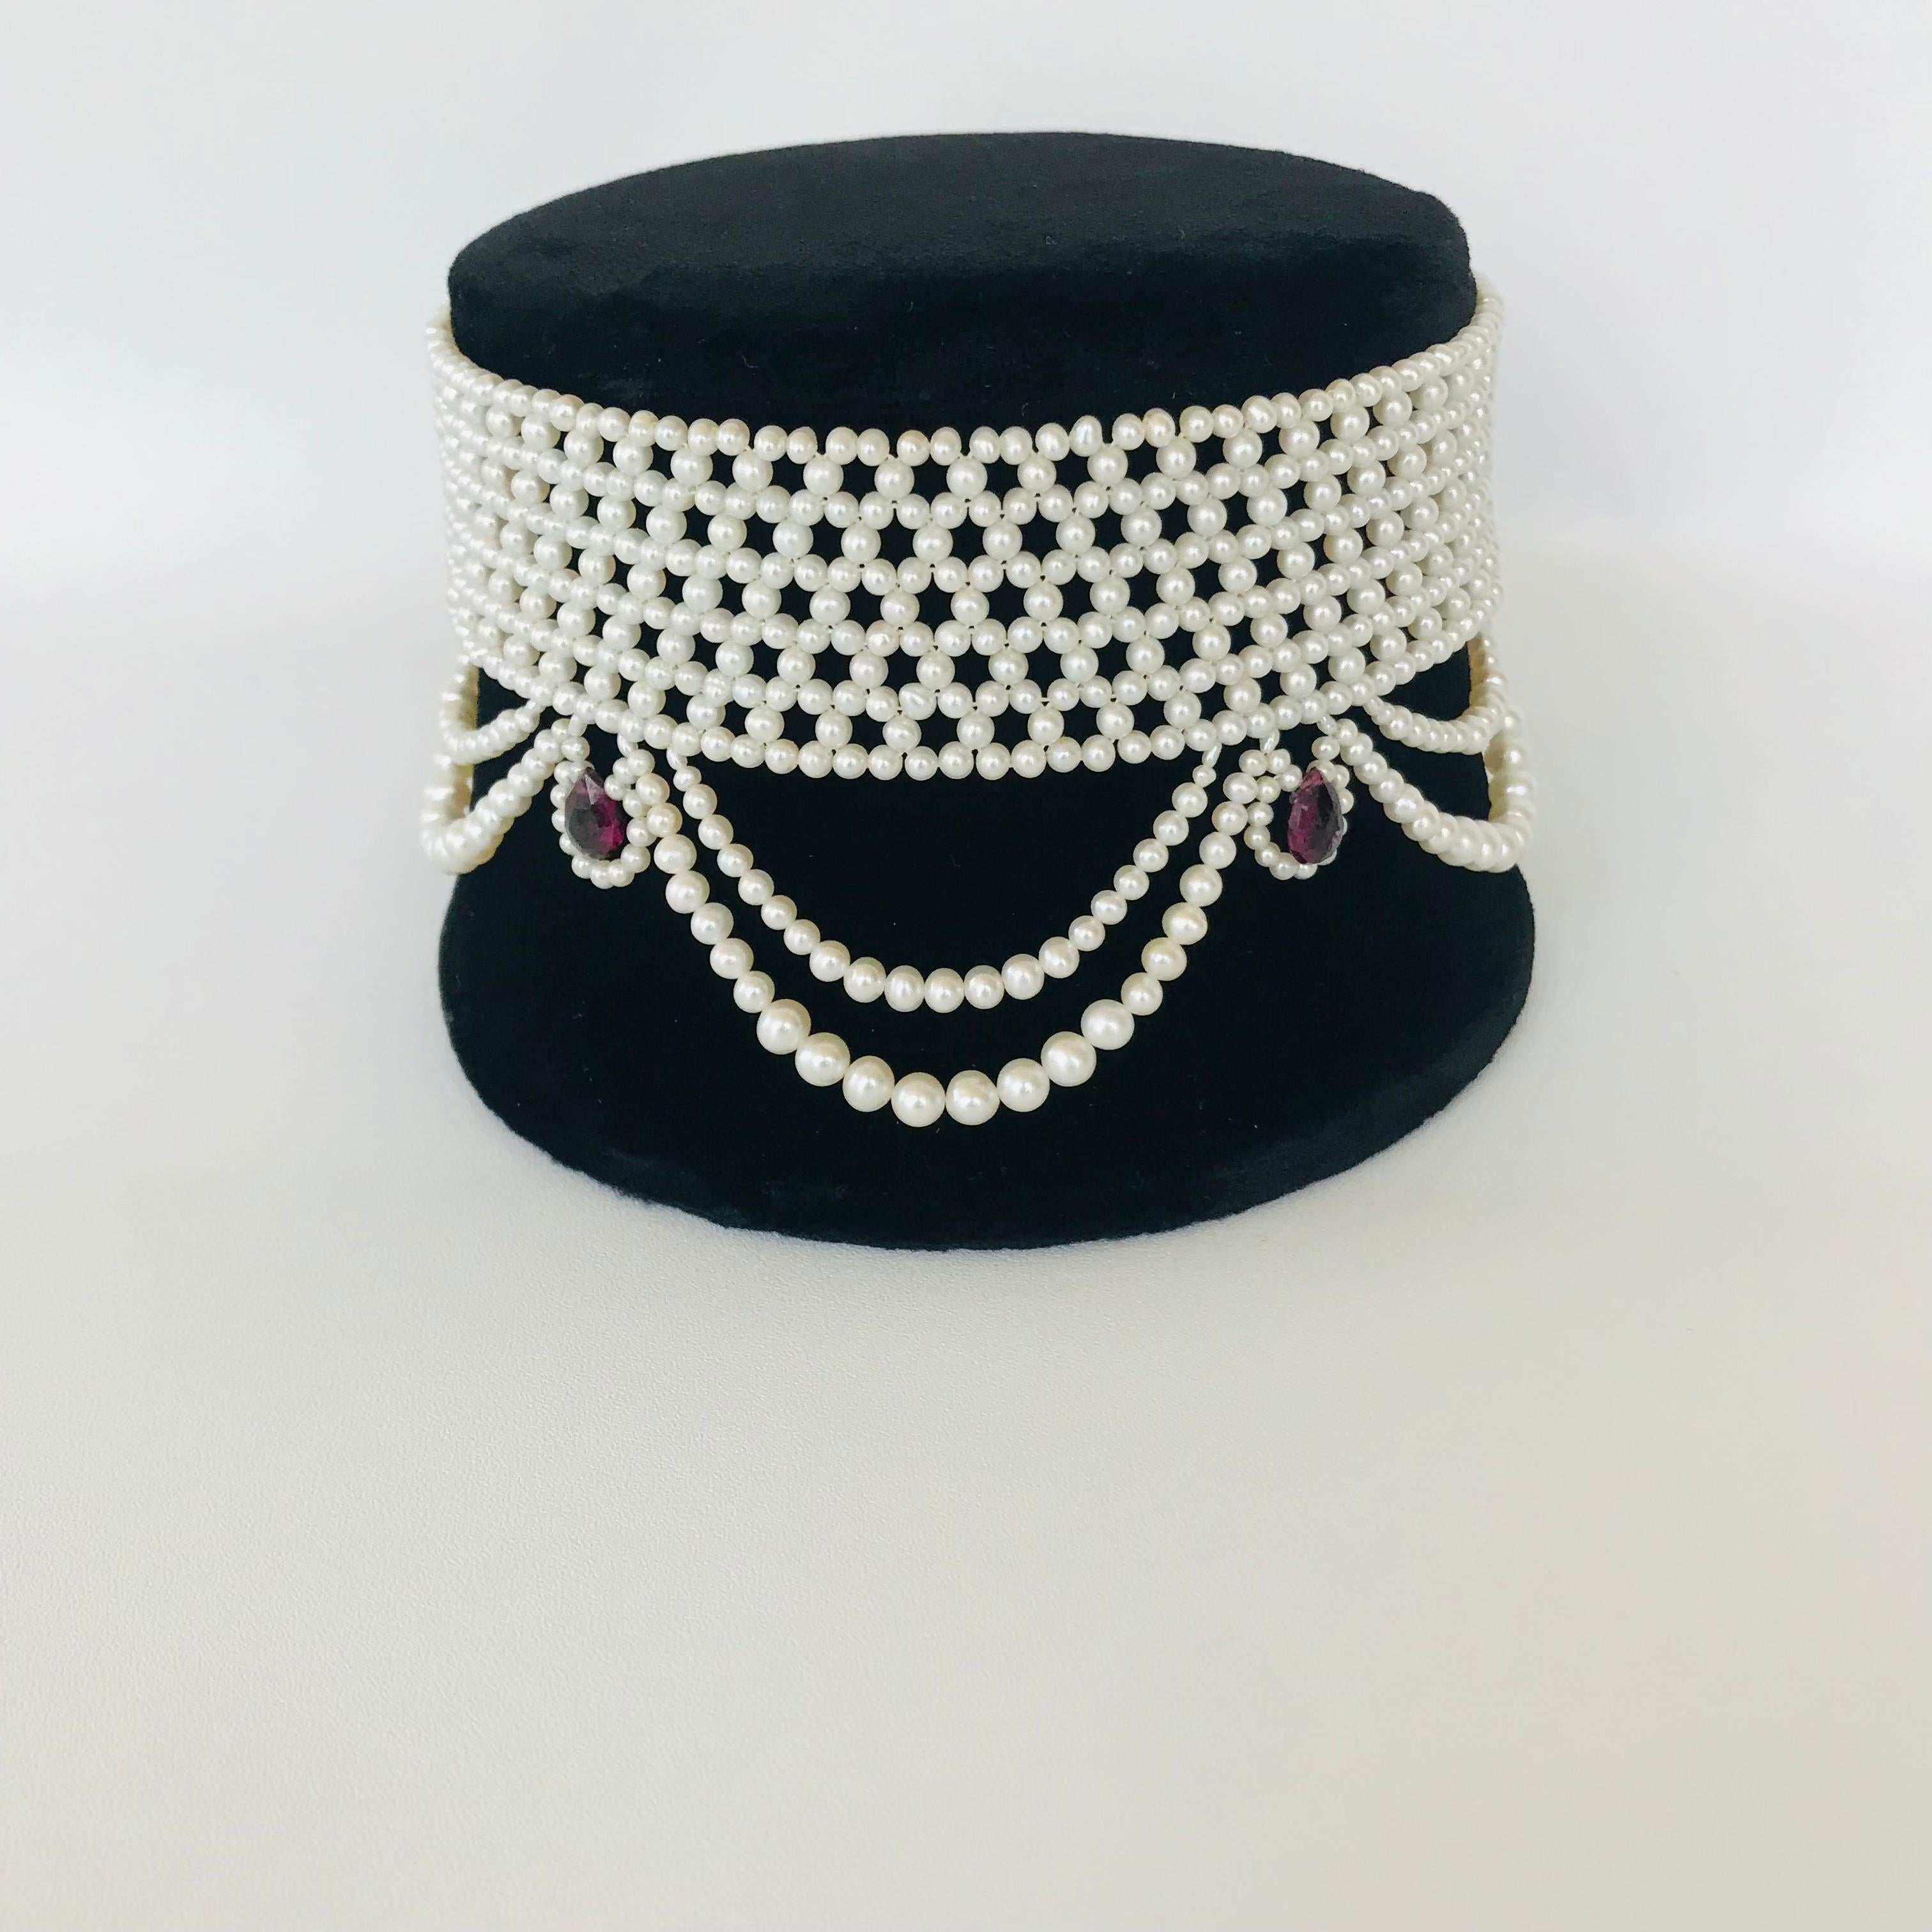 Marina J Woven Pearl Choker with Pearl Drapes, Garnet Briolettes and 14 K Gold 11